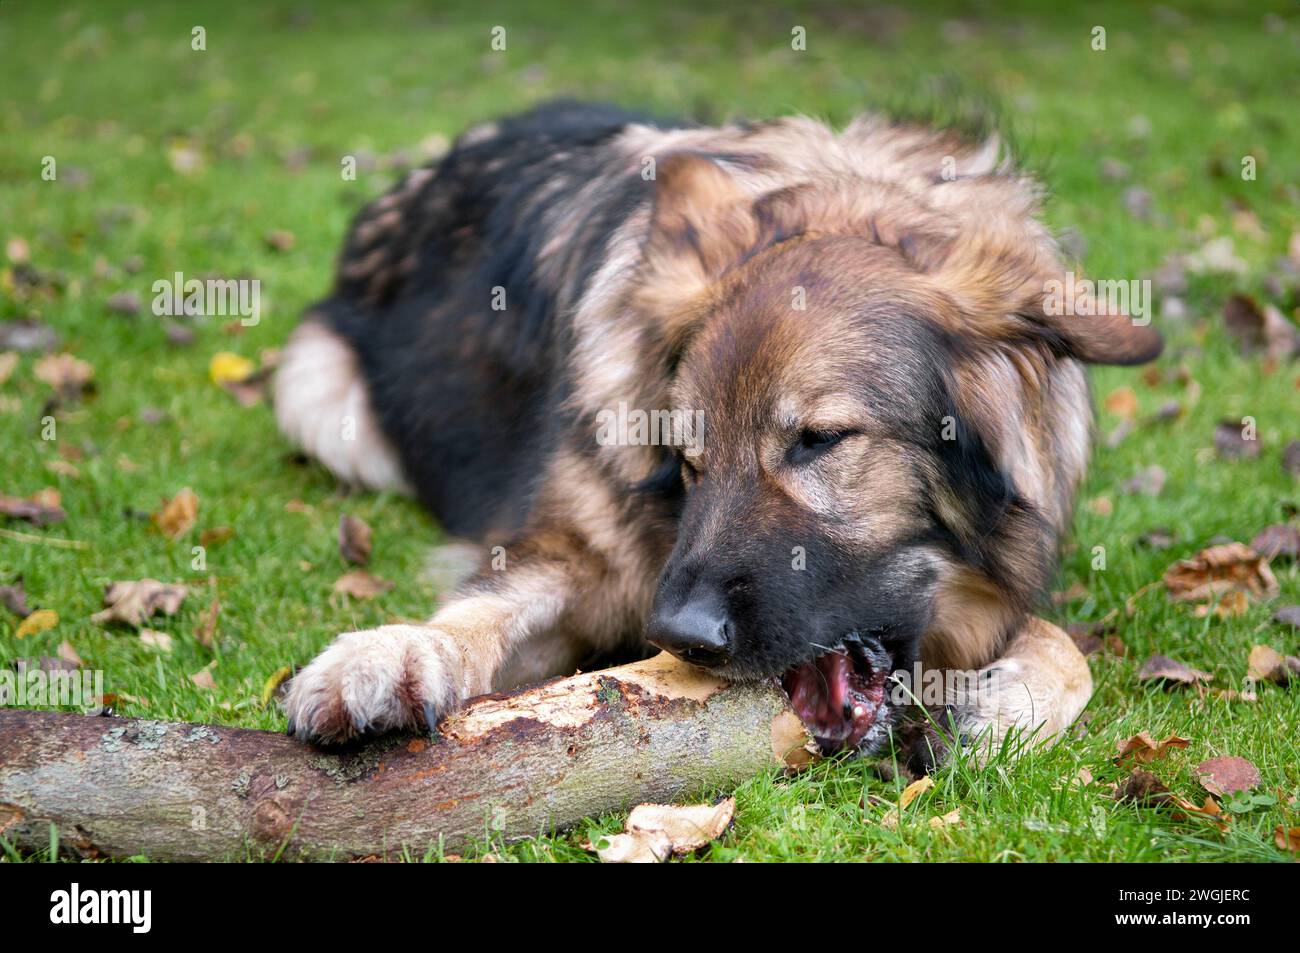 German Shepherd Dog chewing large stick or small log in field in Scotland with autumn leaves Stock Photo